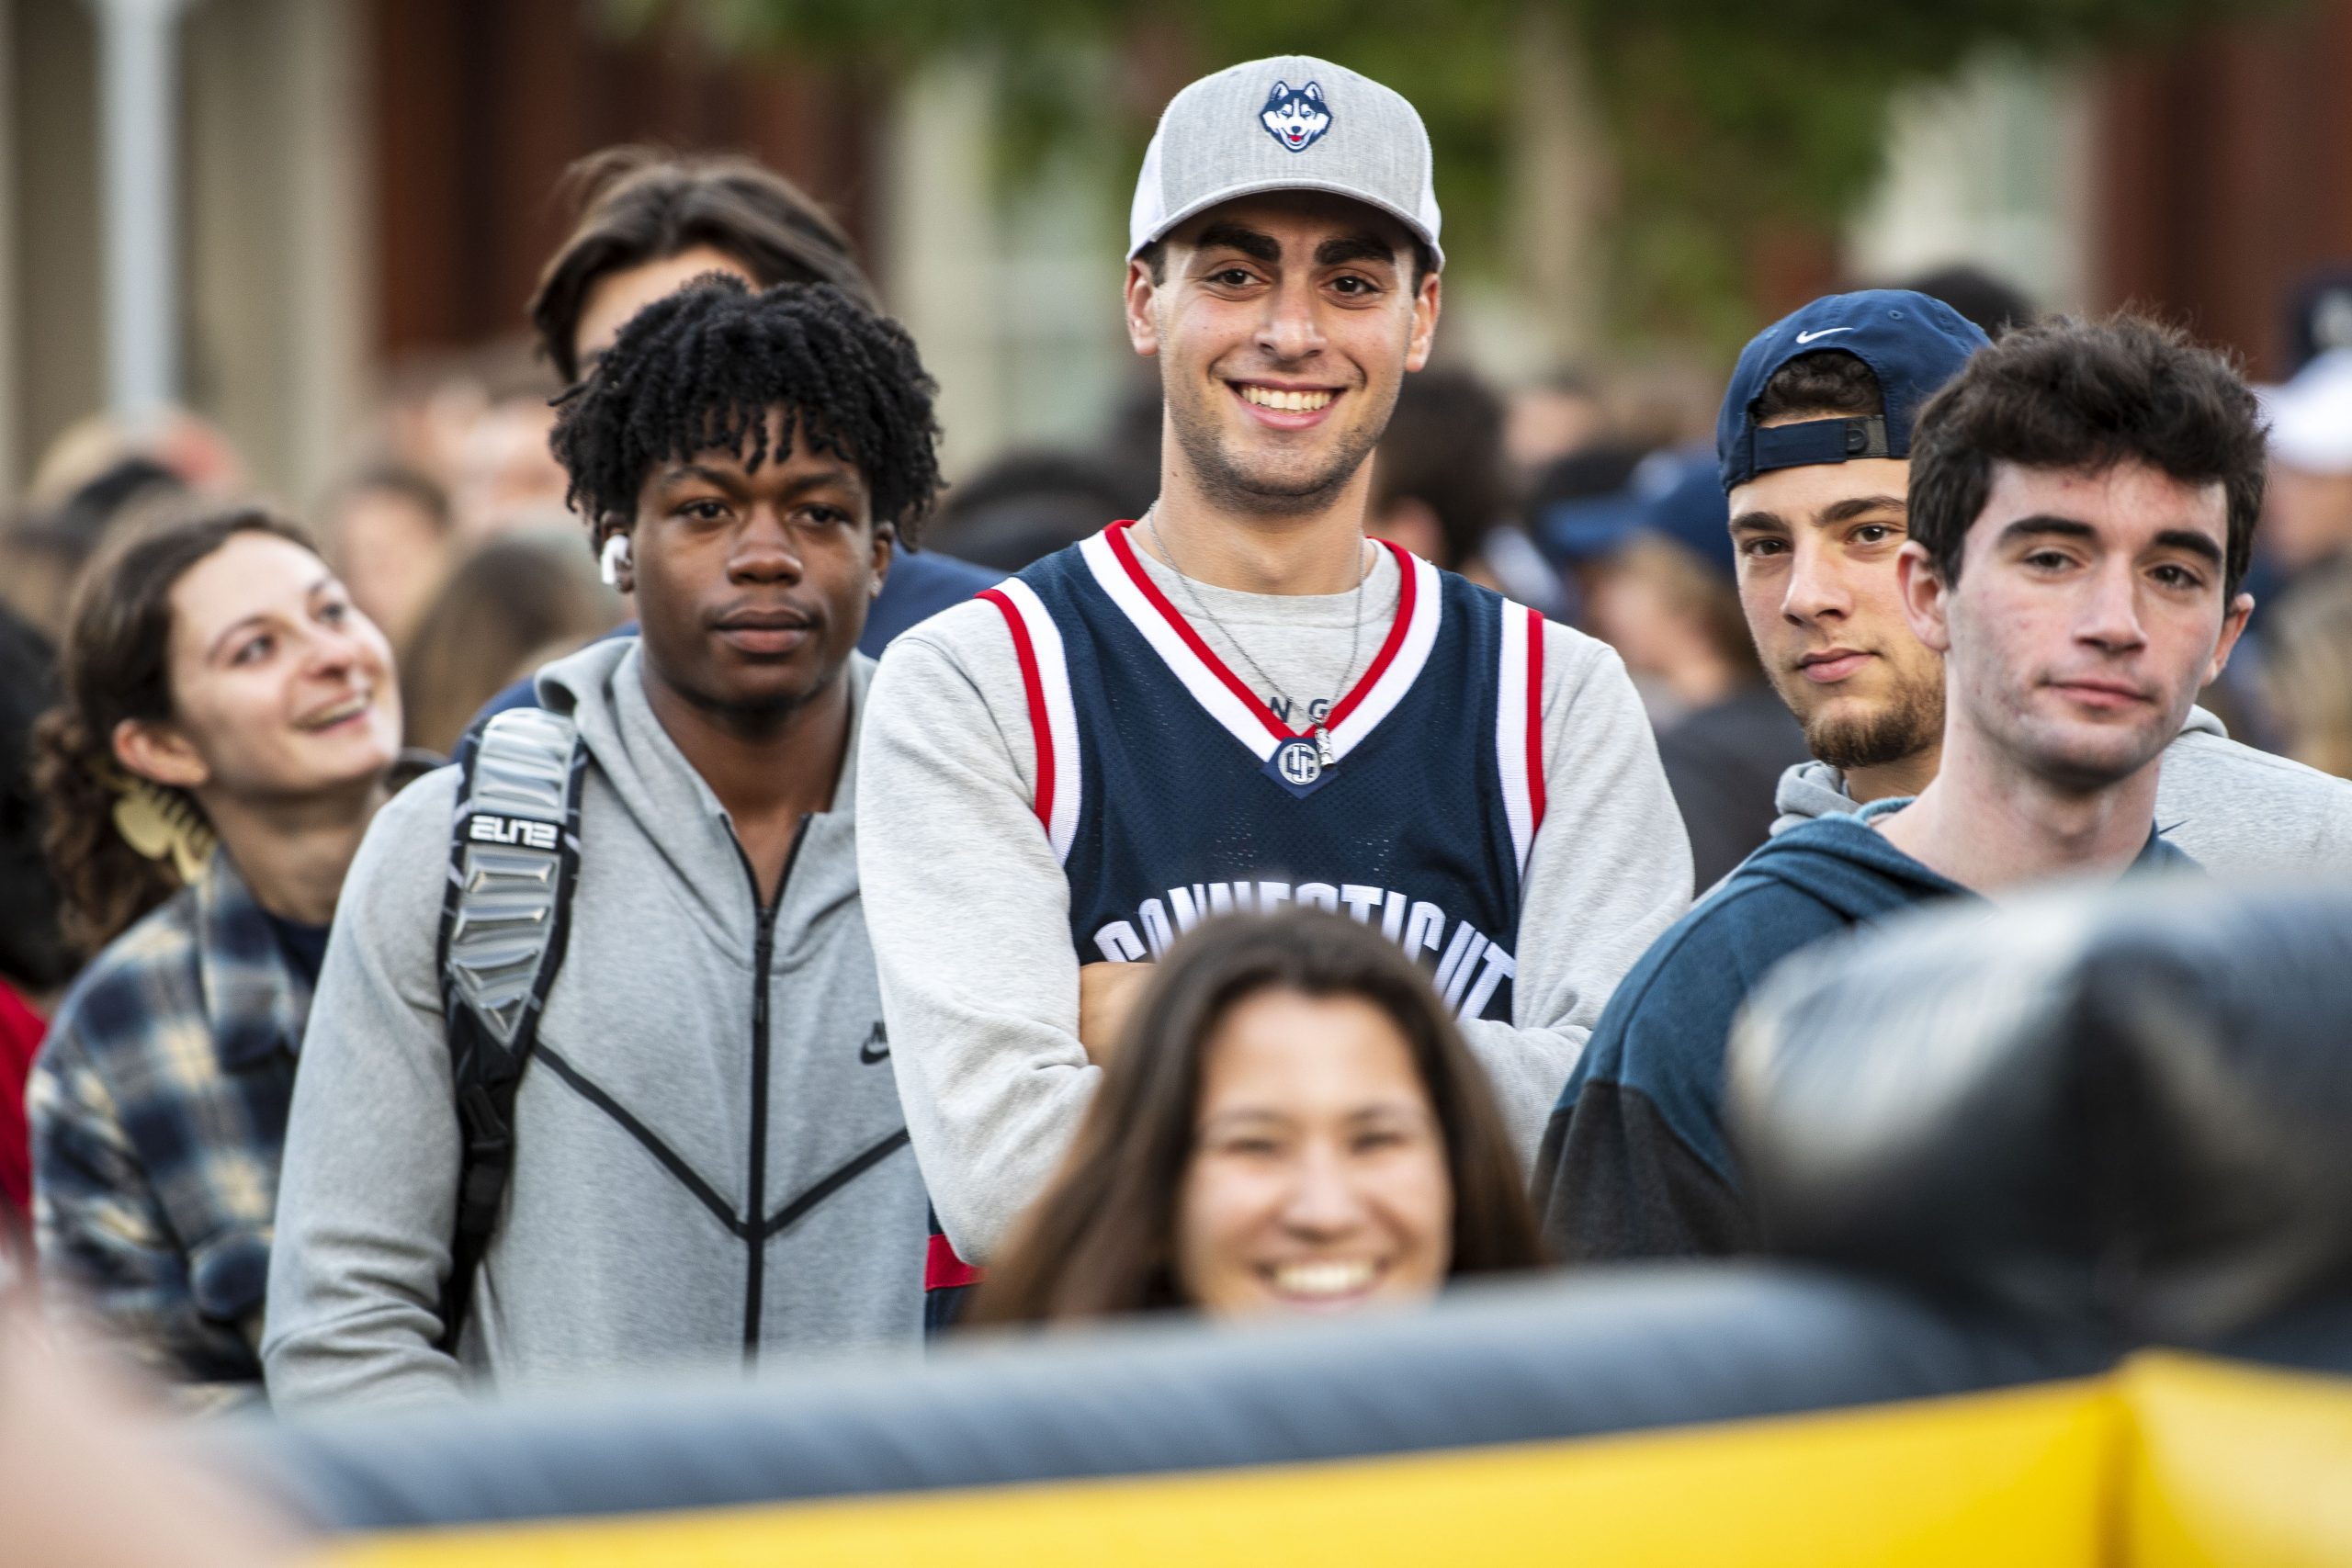 Two female and five male students are among a large group of students gathered outside Gampel Pavilion before First Night. The male student at the center smiles and is wearing a UConn Husky logo hat and a "Connecticut" basketball jersey.